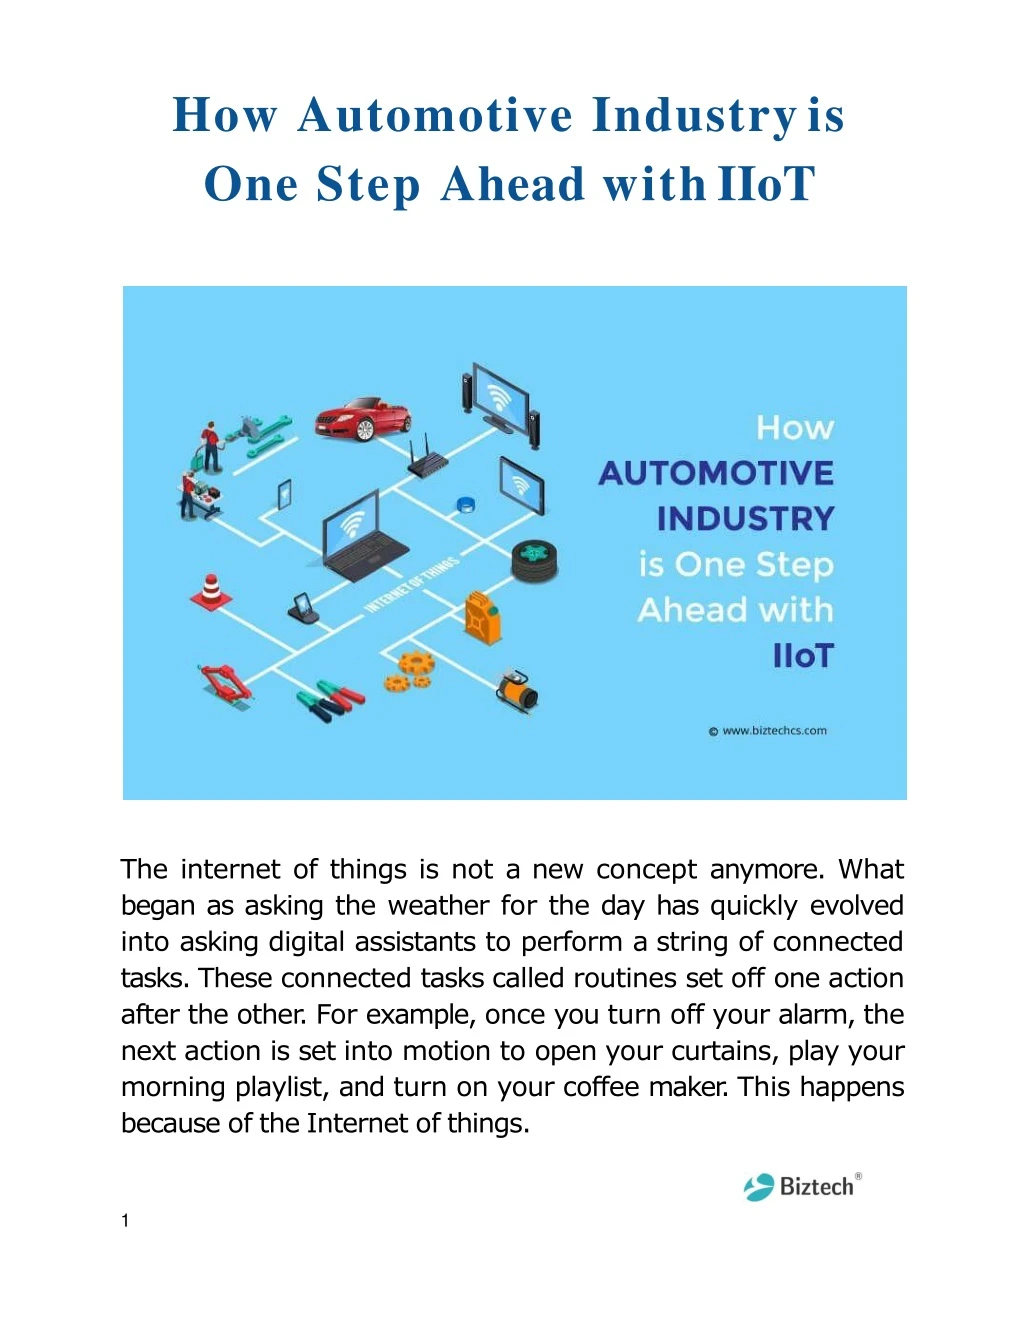 how automotive industry is one step ahead with iiot